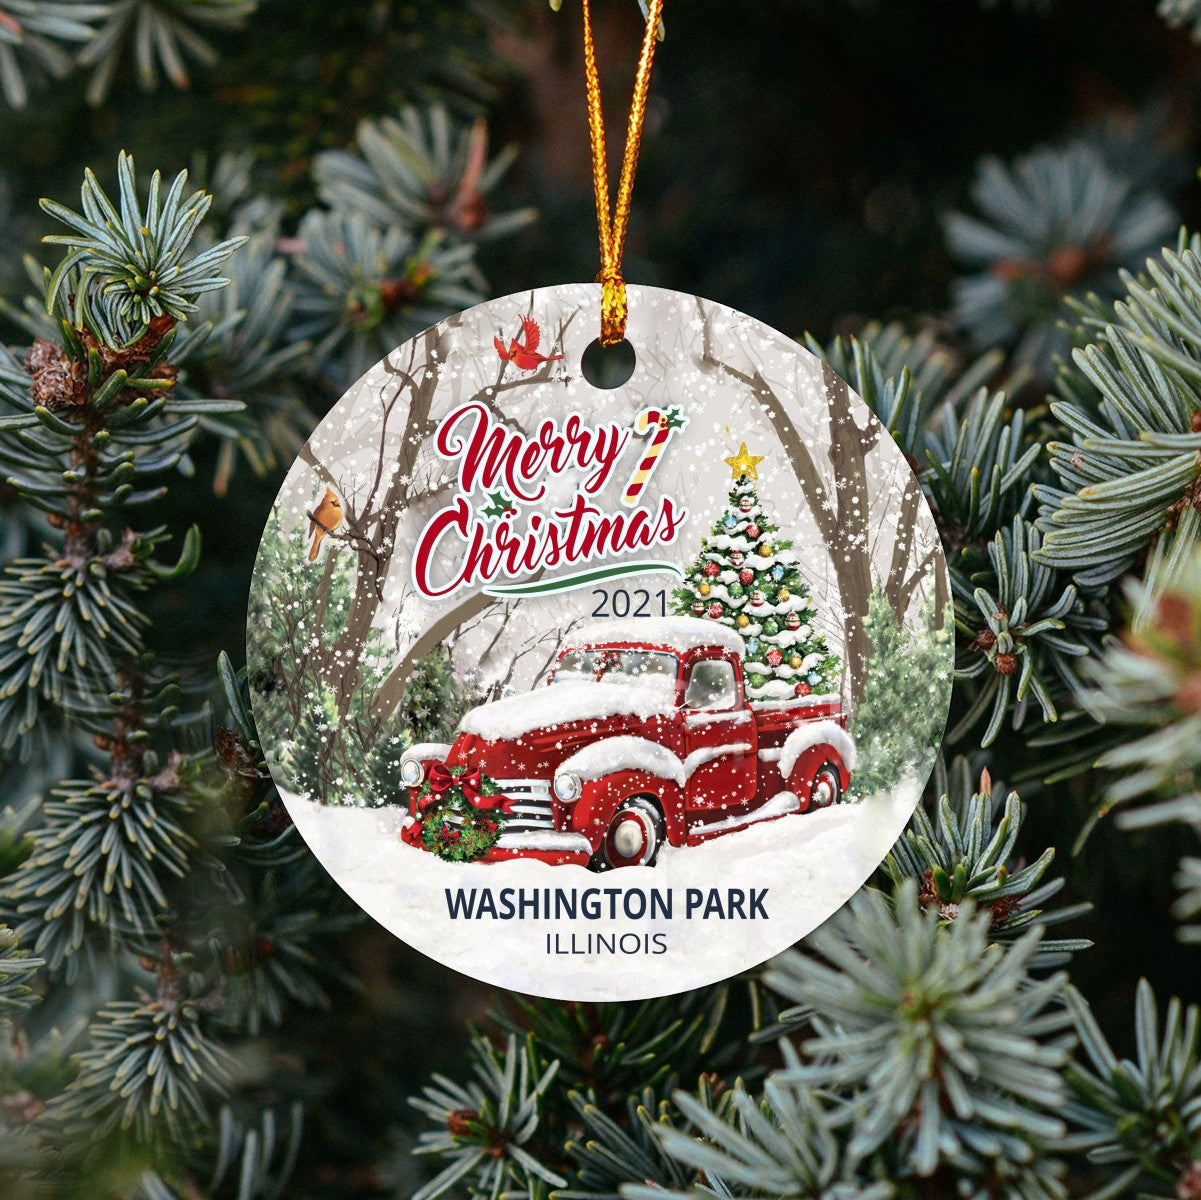 Christmas Tree Ornaments Washington Park - Ornament With Name City, State Washington Park Illinois IL Ornament - Red Truck Xmas Ornaments 3'' Plastic Gift For Family, Friend And Housewarming